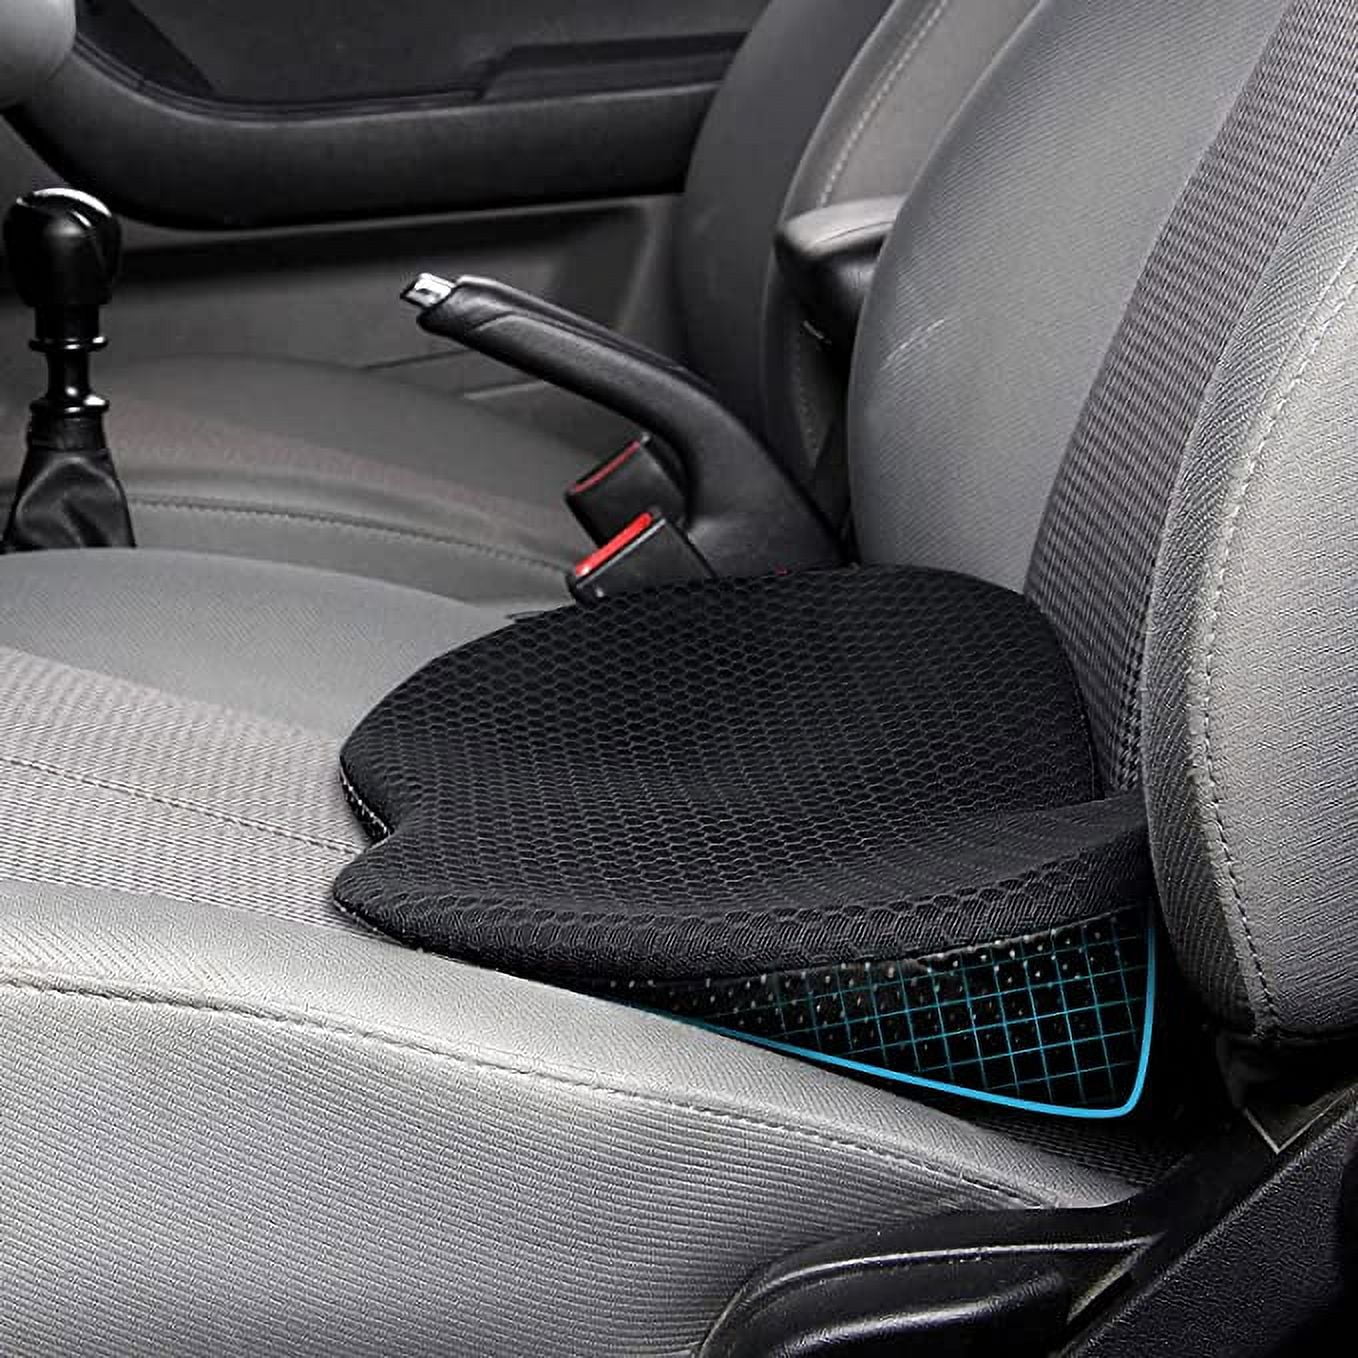 Allaboutsla Car Seat Cushion, Car Seat Cushions for Driving with Comfort  Memory Foam - Sciatica & Back Pain Relief, Suitable for Car, Truck, Office